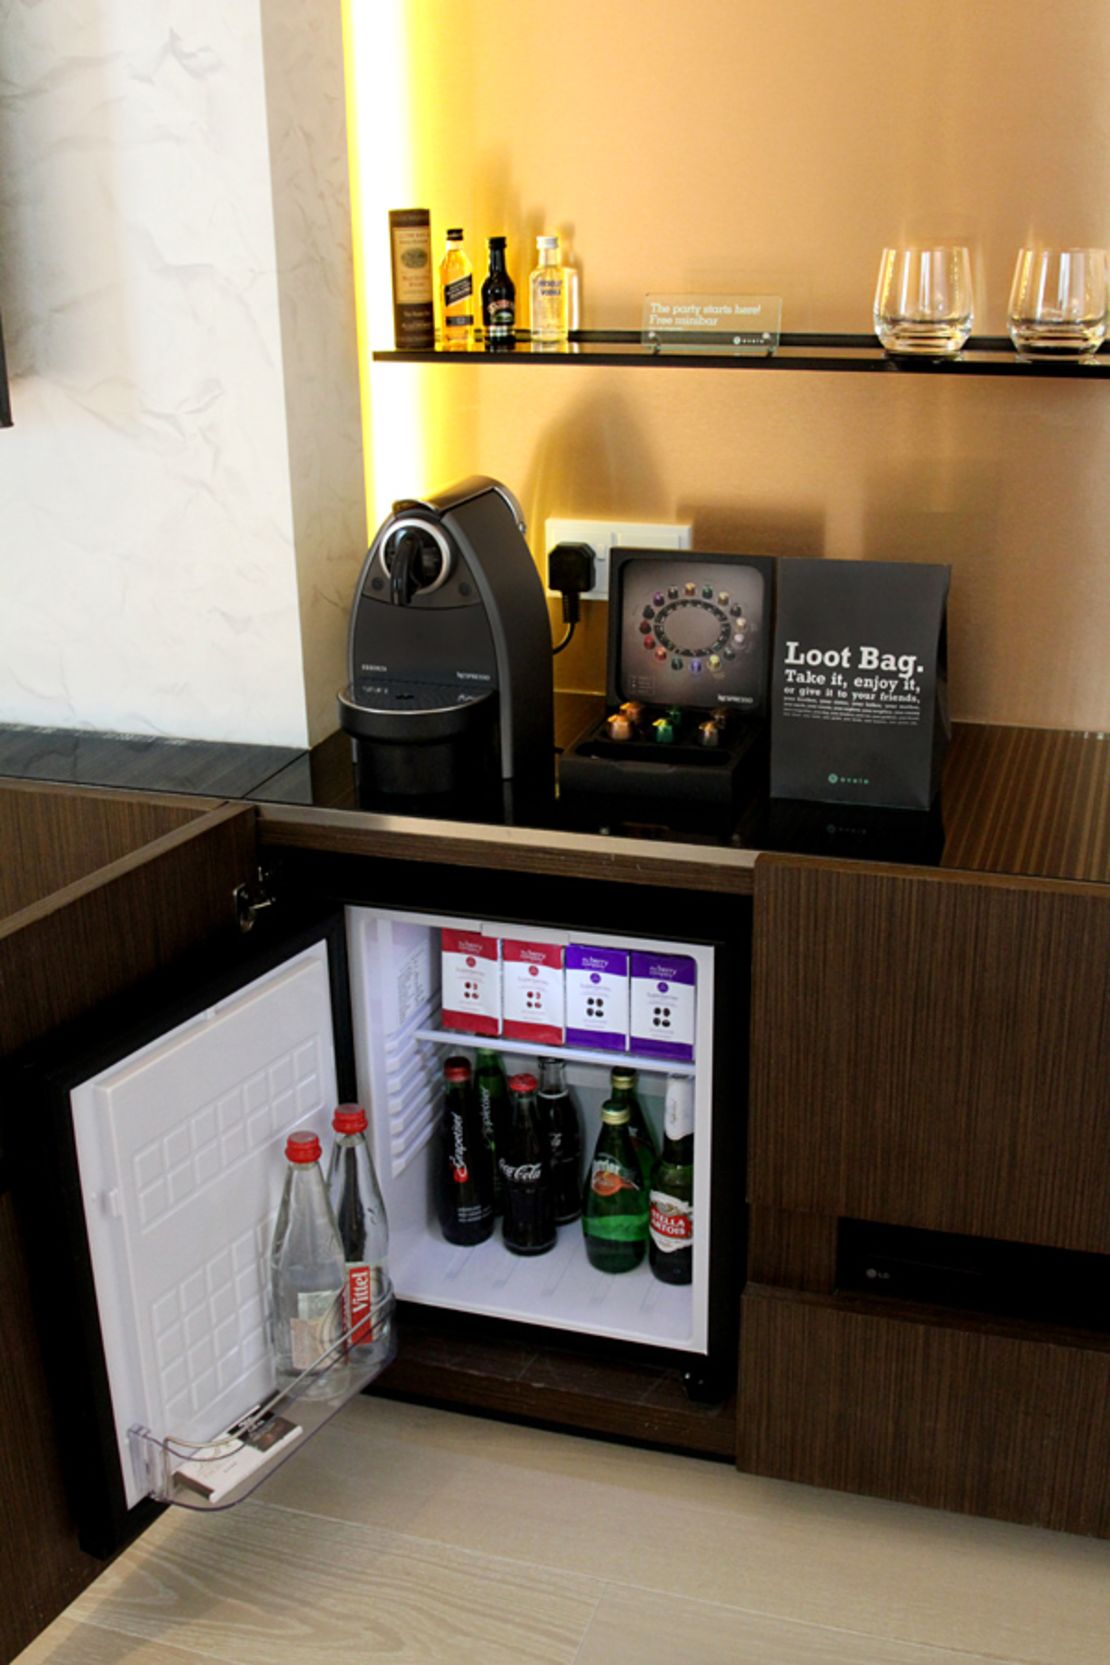 Hotel Minibars Try to Make a Comeback With Better Design and Local